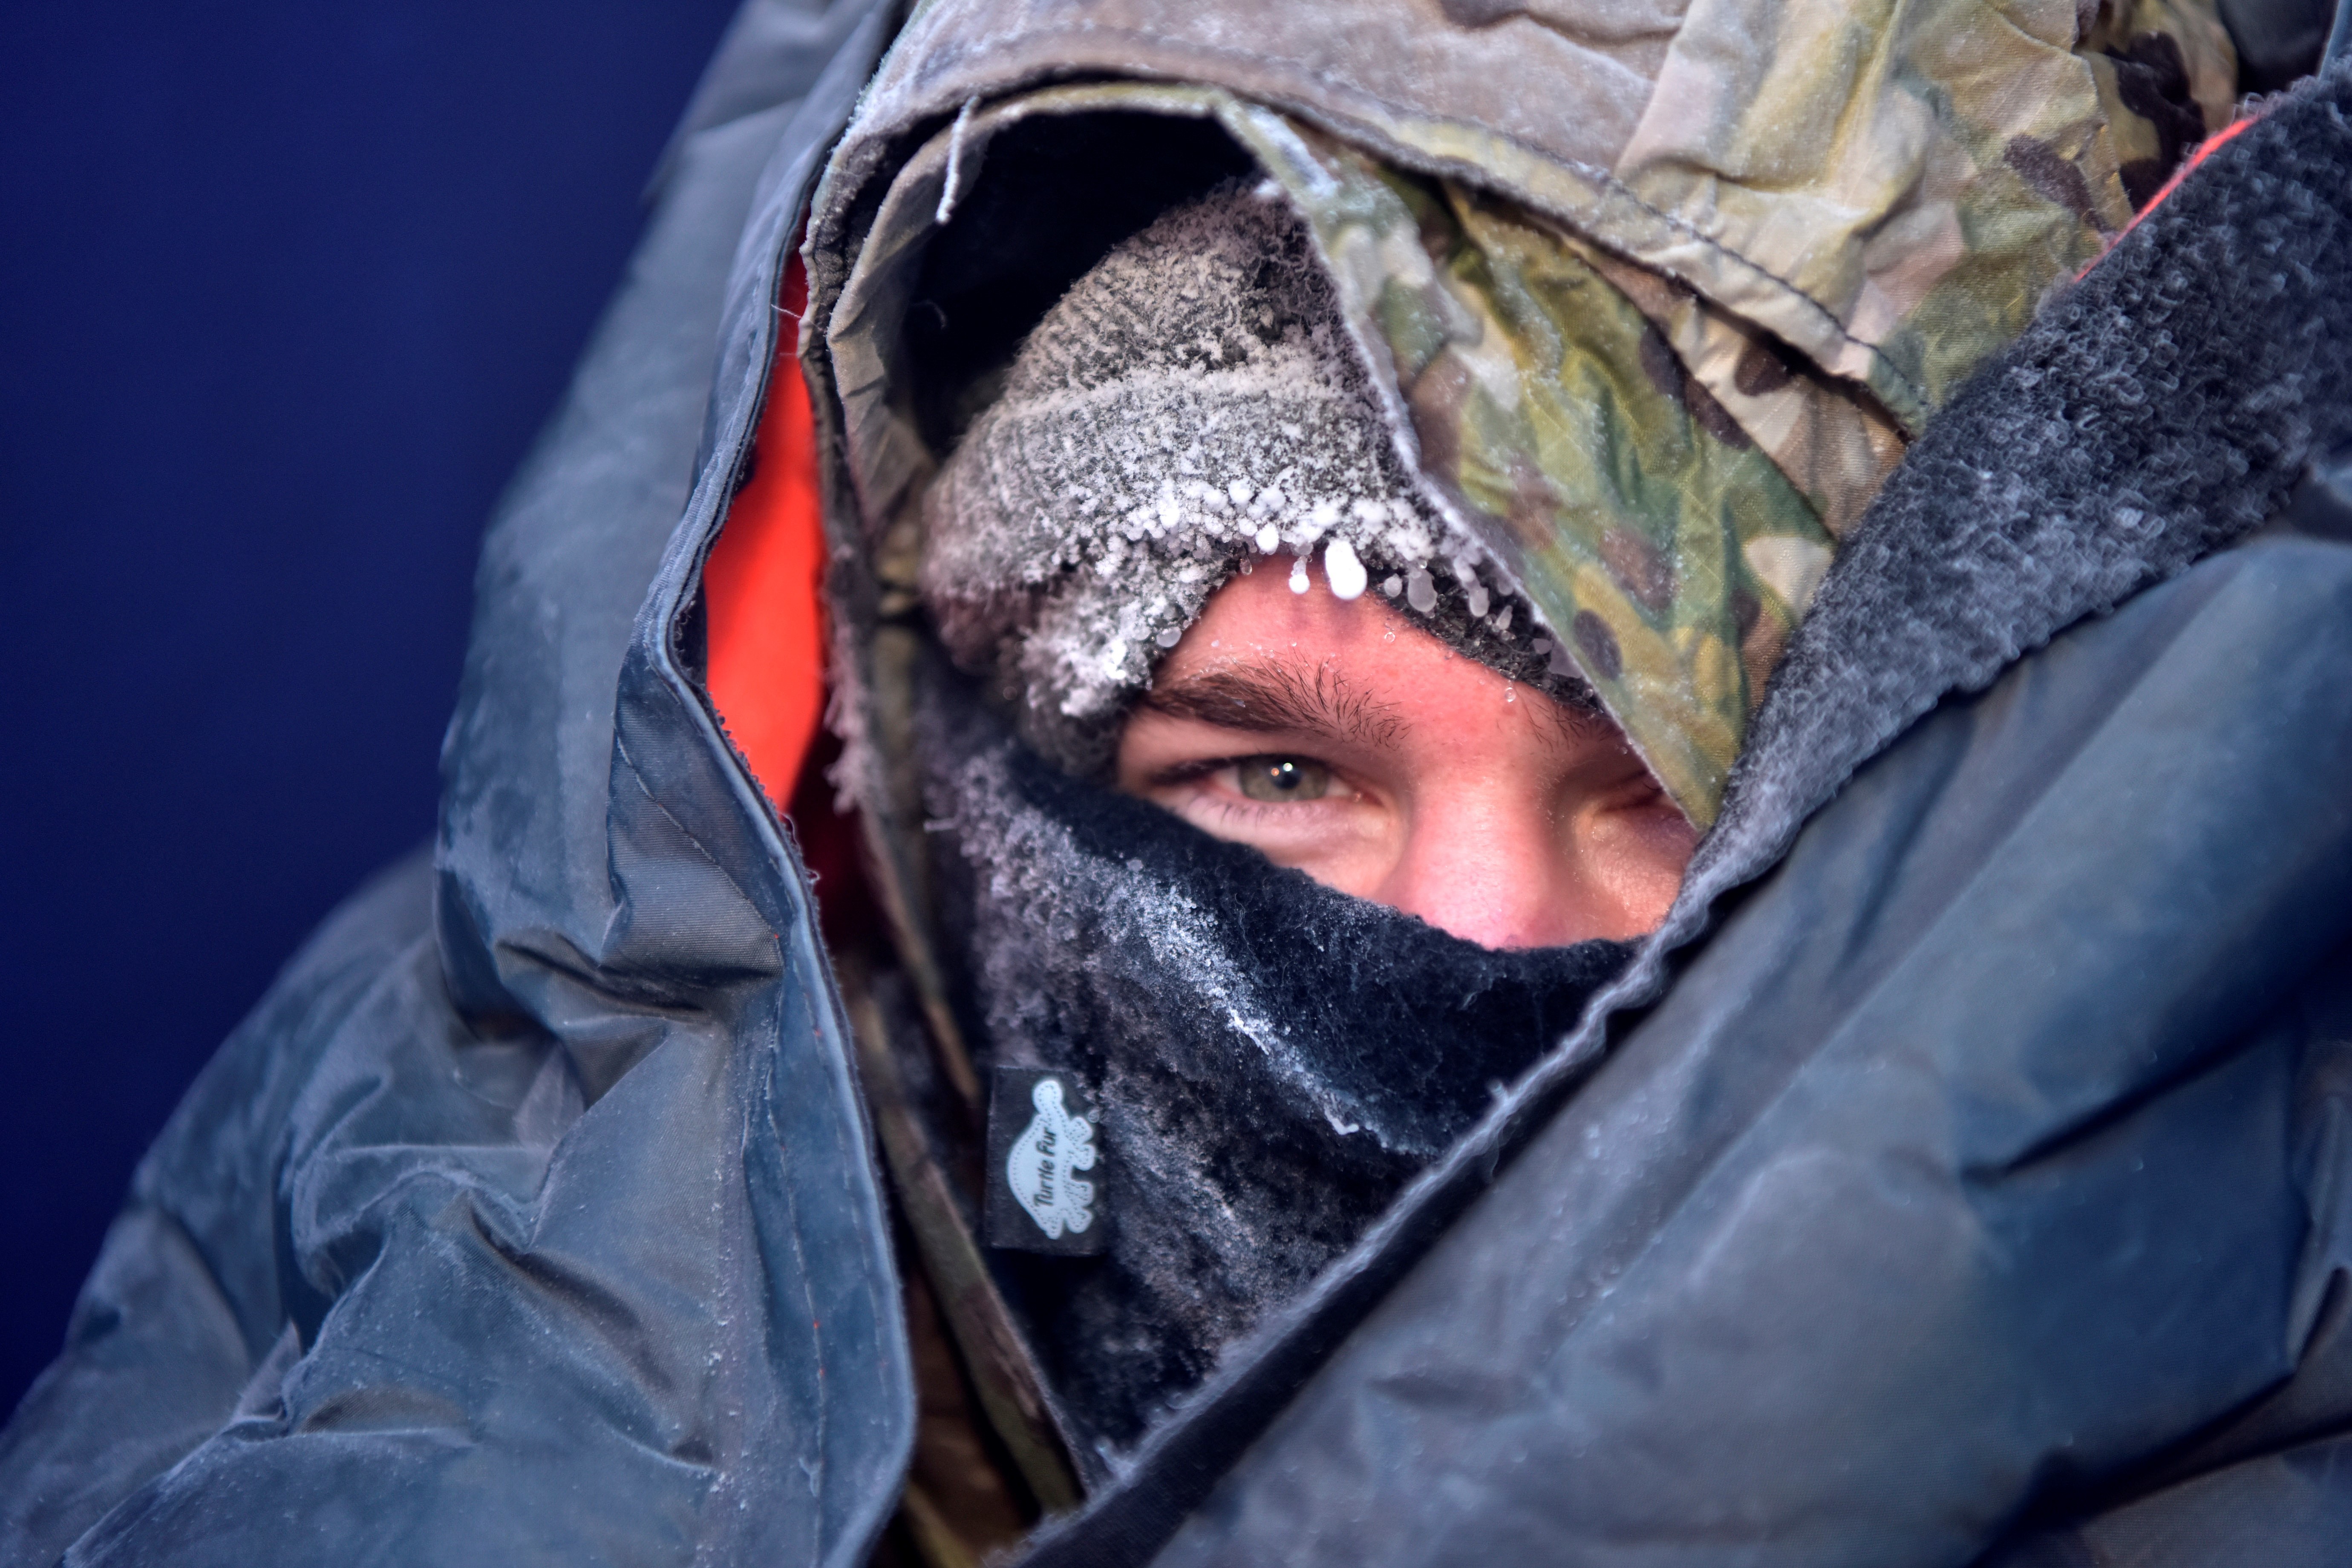 Today's Air Force Arctic survival gear tests have a long history in Alaska  - ArcticToday